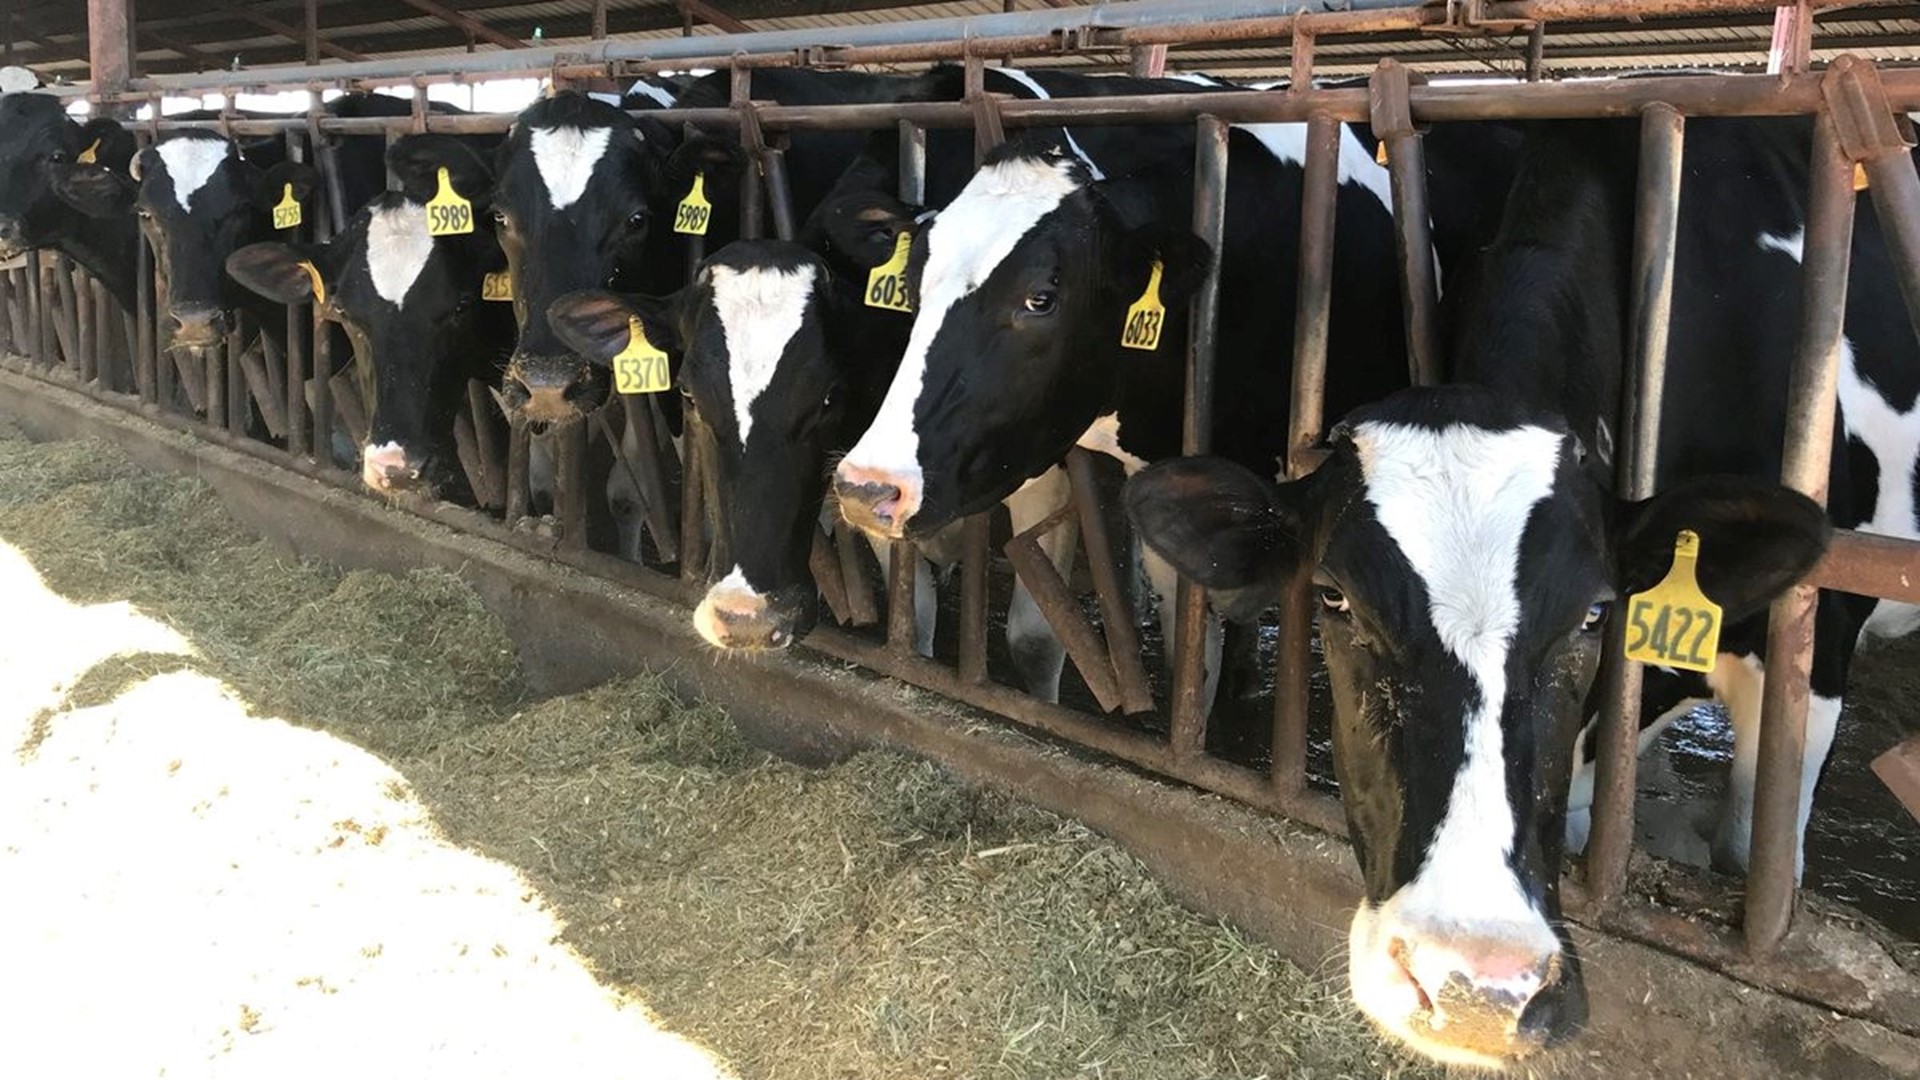 More farmers than ever before are making the difficult choice to leave the dairy business in Stanislaus County, according to a USDA Census of Agriculture report. One farmer tells ABC10, stiff regulations and the high cost of living is the culprit.